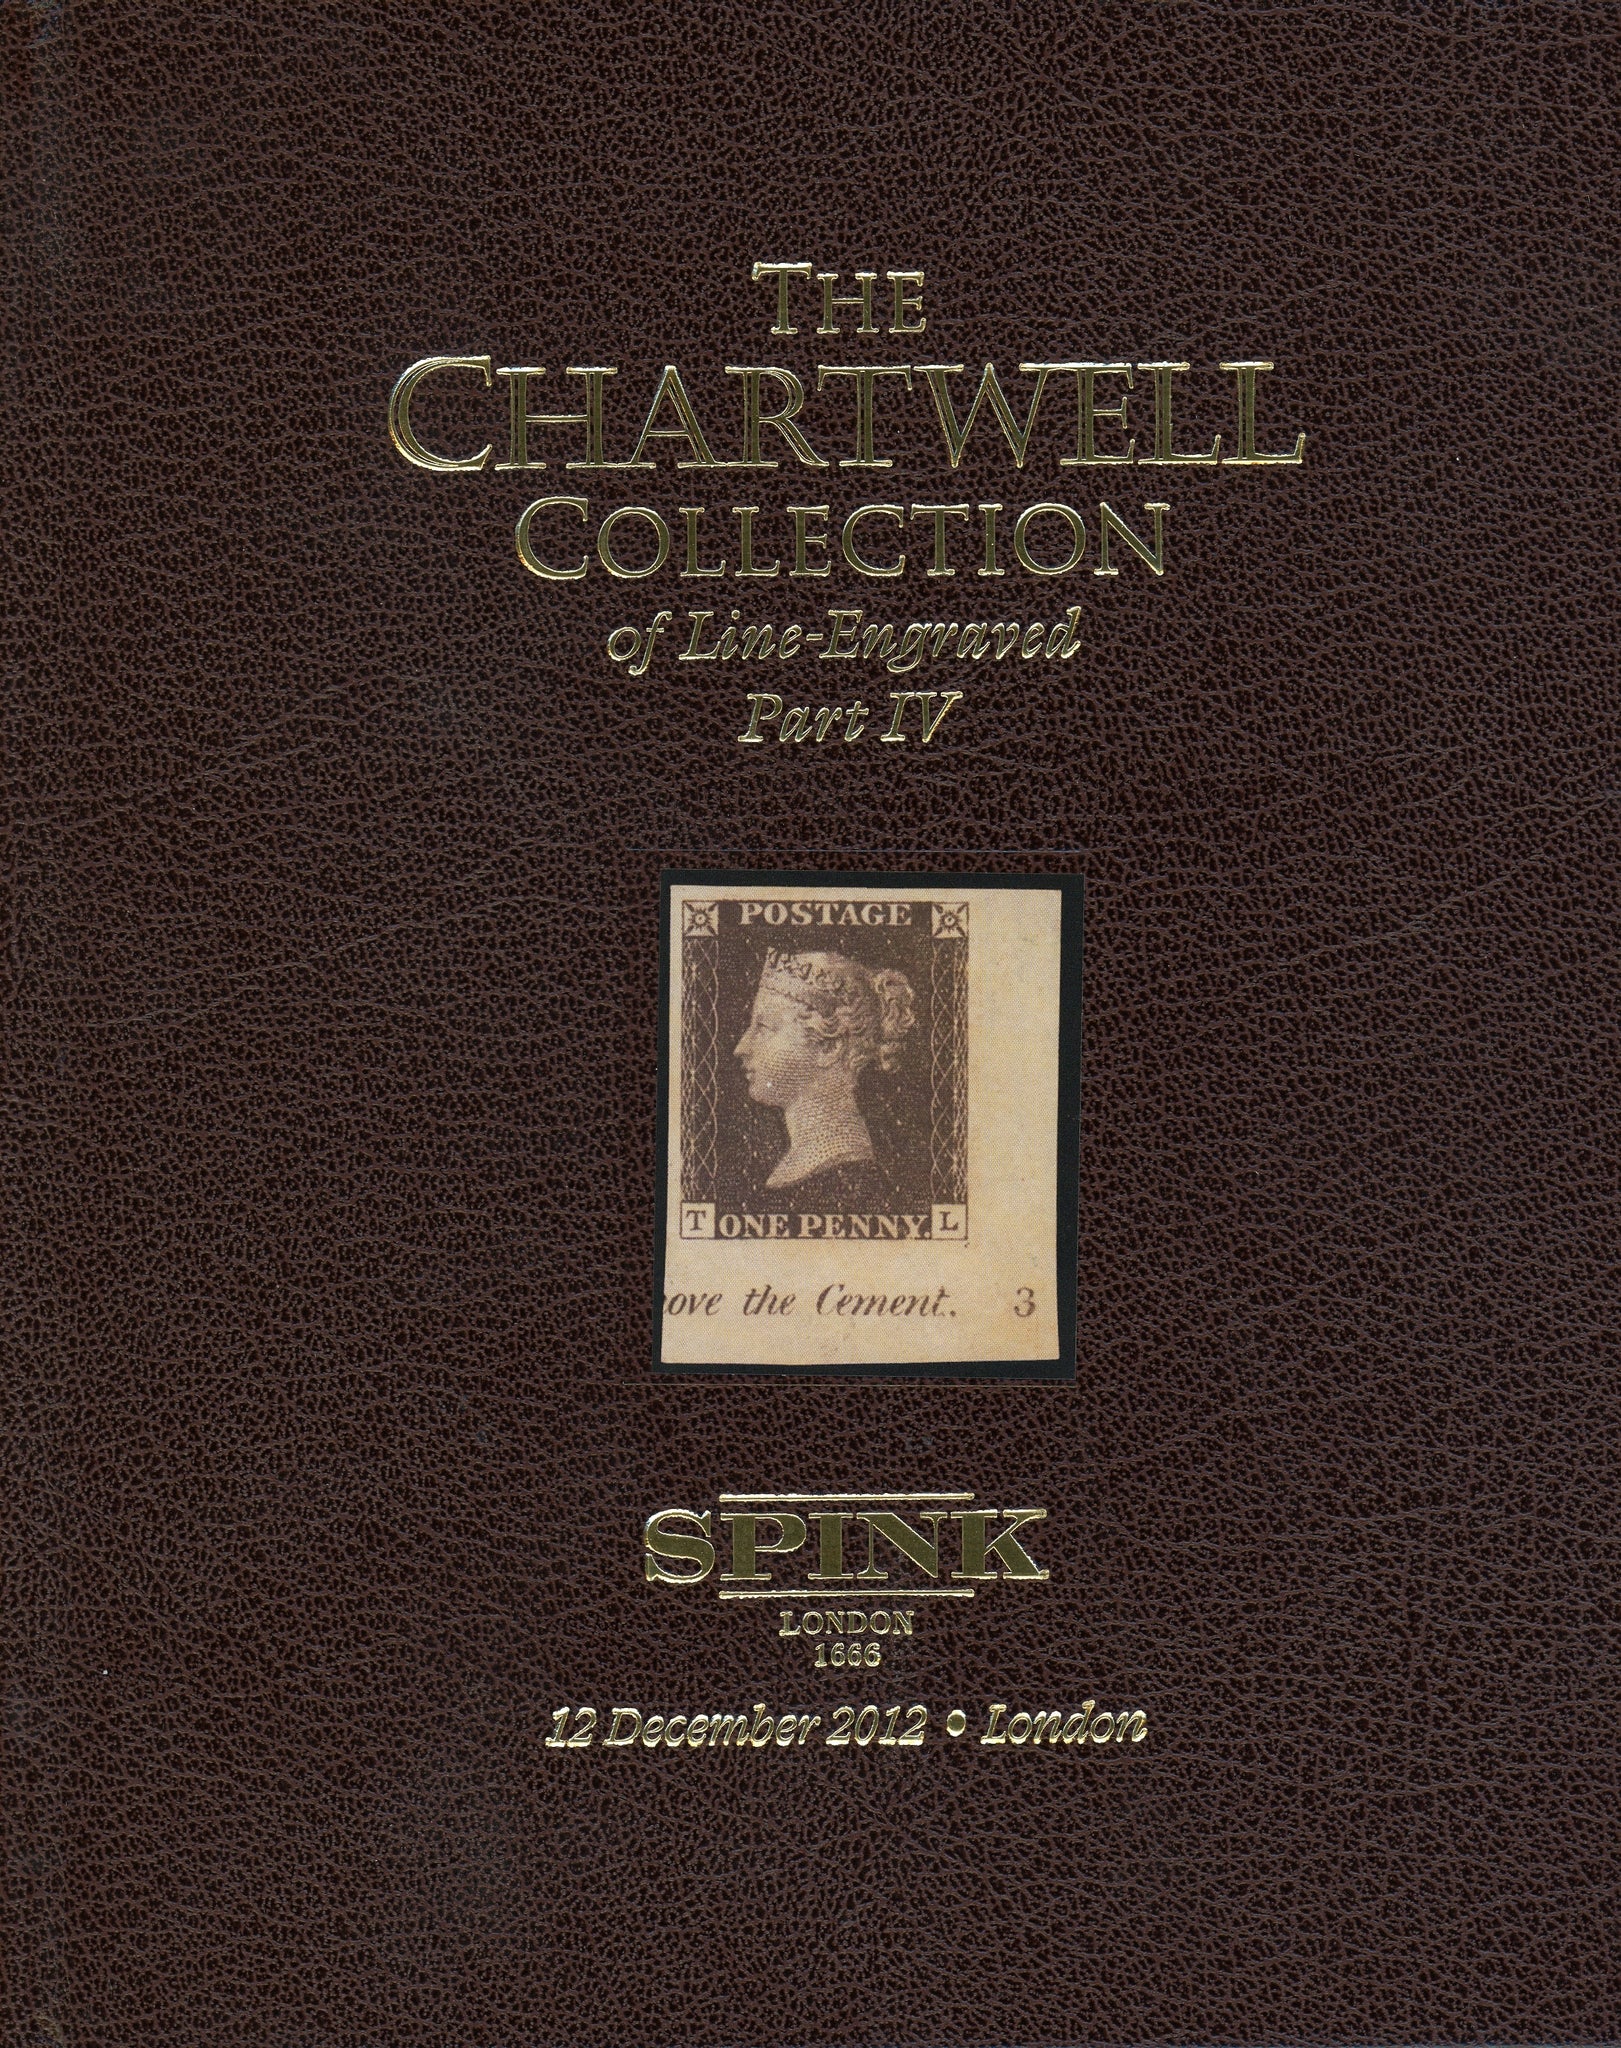 The Chartwell Collection of Line Engraved Part IV Vol 9 - 12 December 2012 Spink London